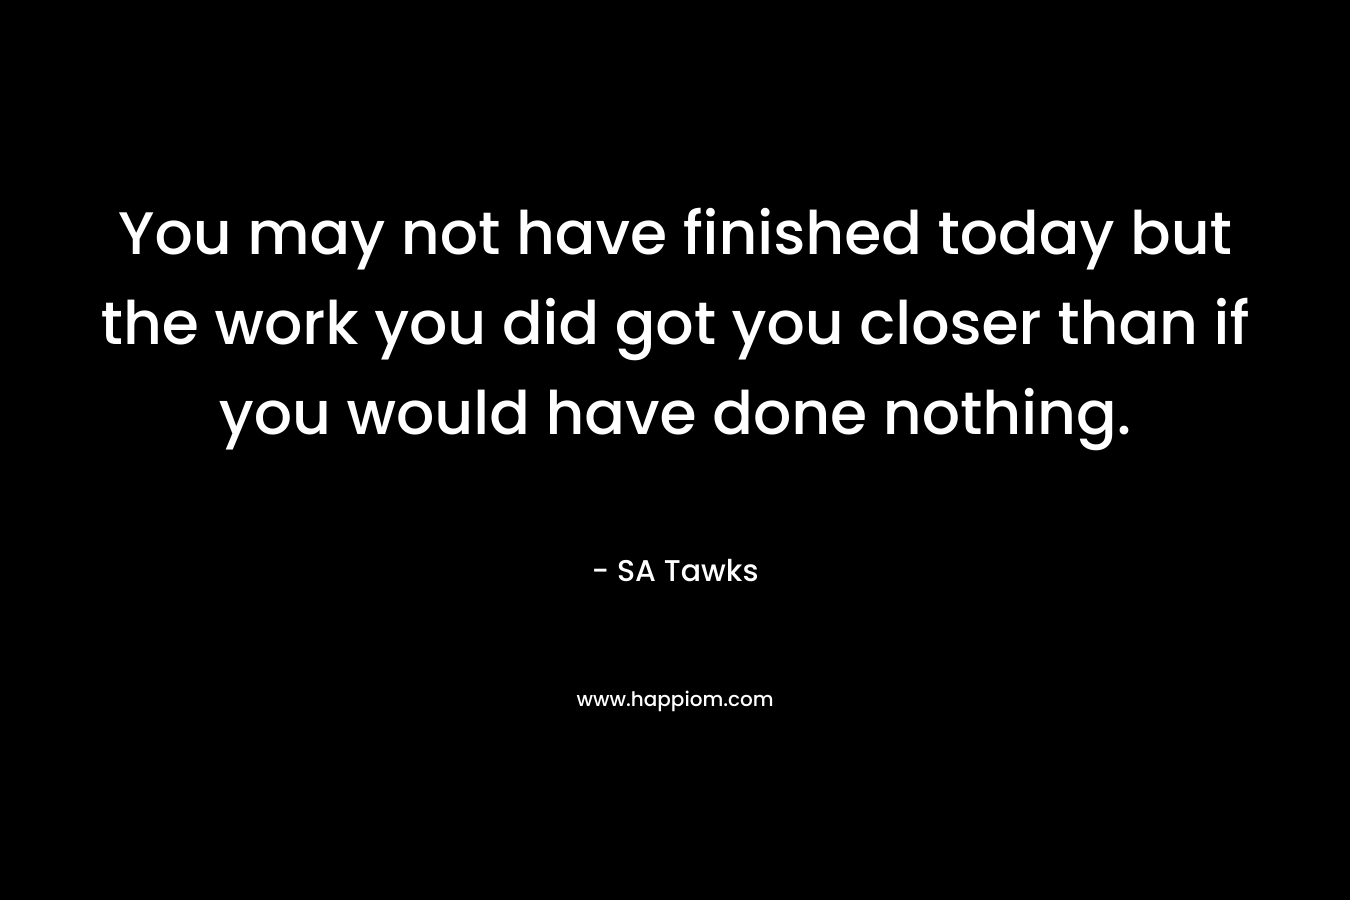 You may not have finished today but the work you did got you closer than if you would have done nothing.